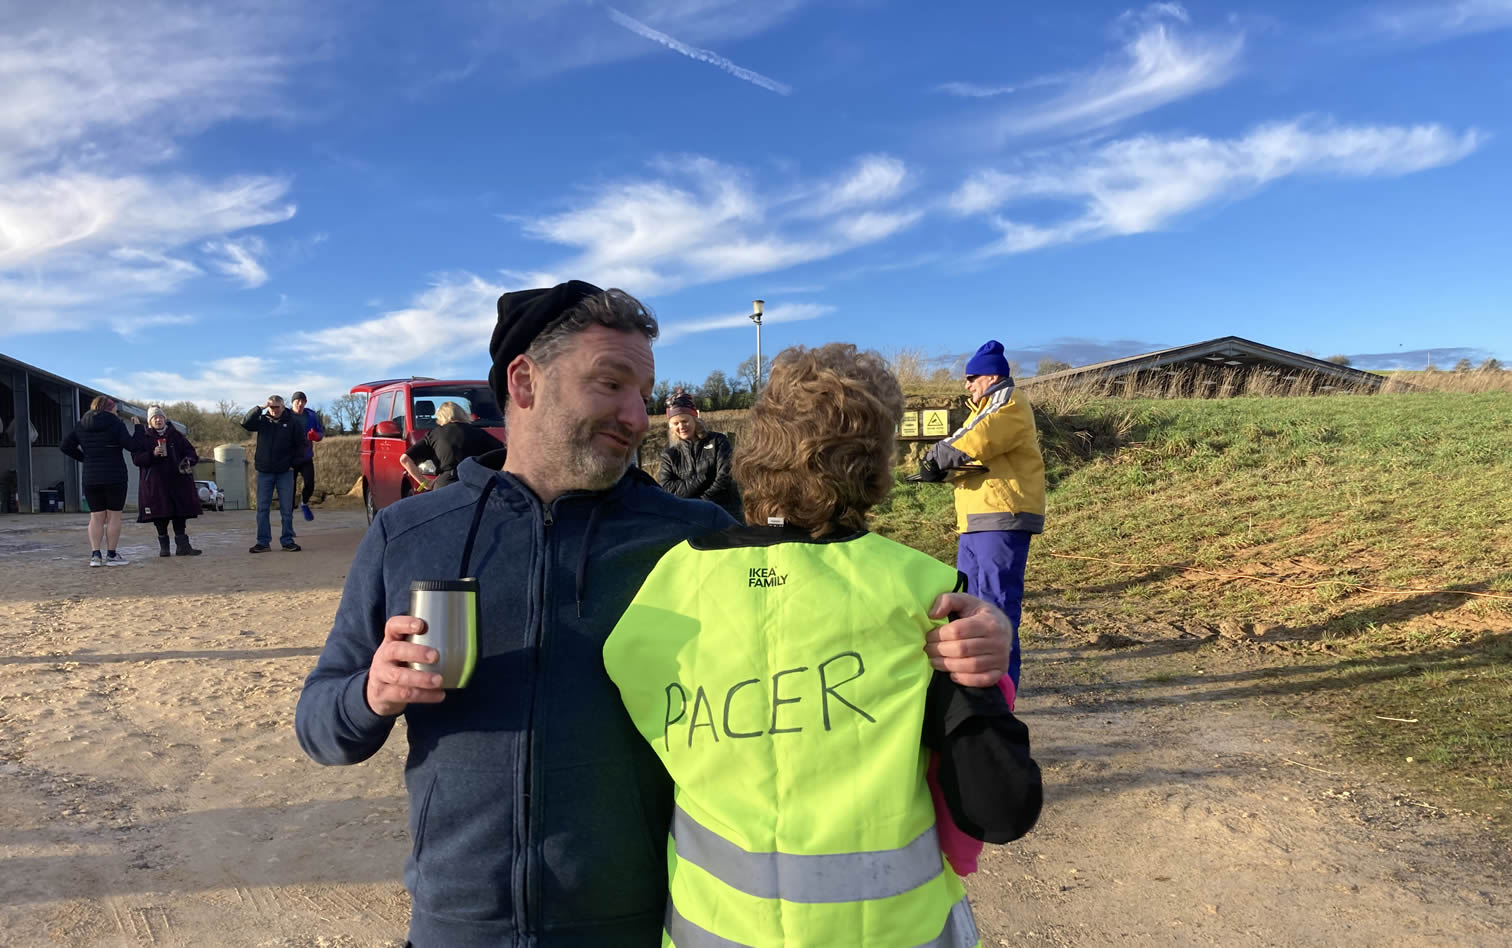 Barry and Shirl at BRR Social Relay, Guiting Power - 2nd January 2023